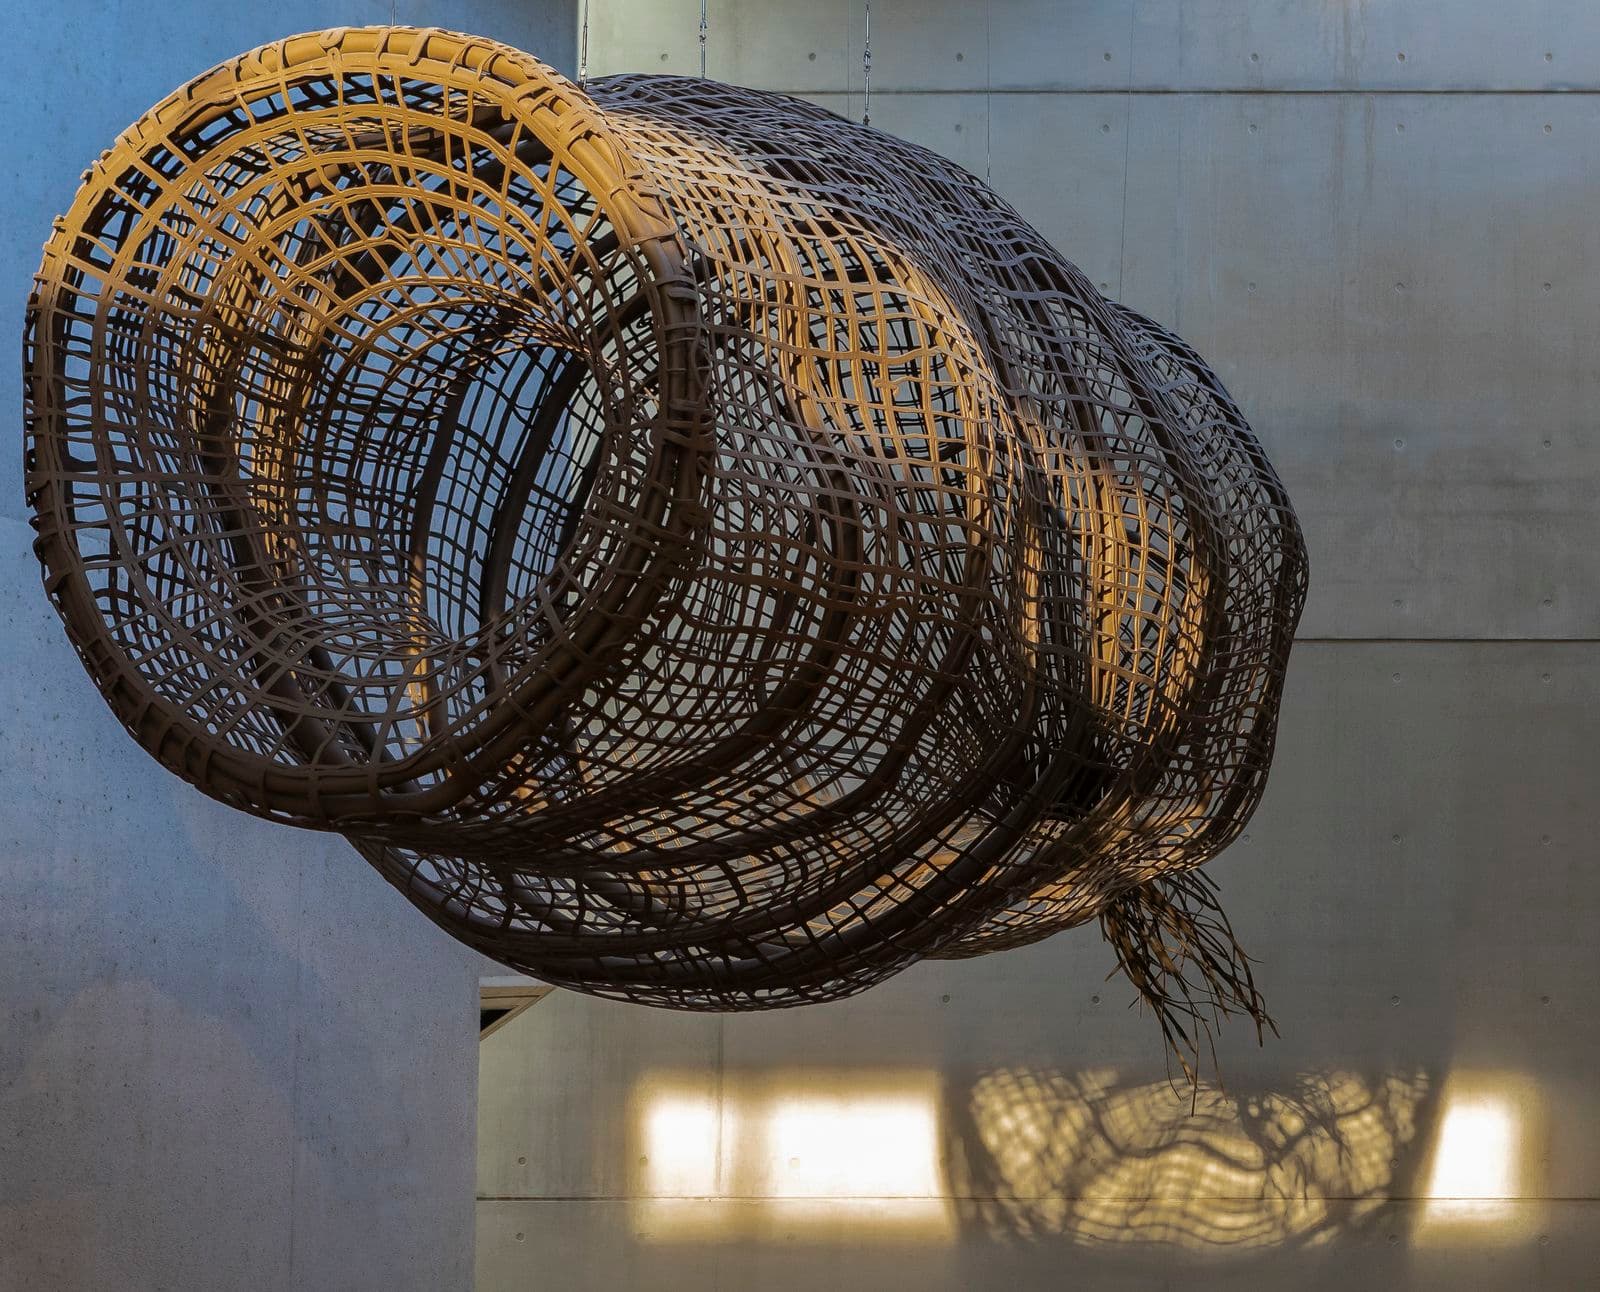 A large metal sculpture of an Indigenous Australian fish trap is hanging from the ceiling in a large gallery foyer